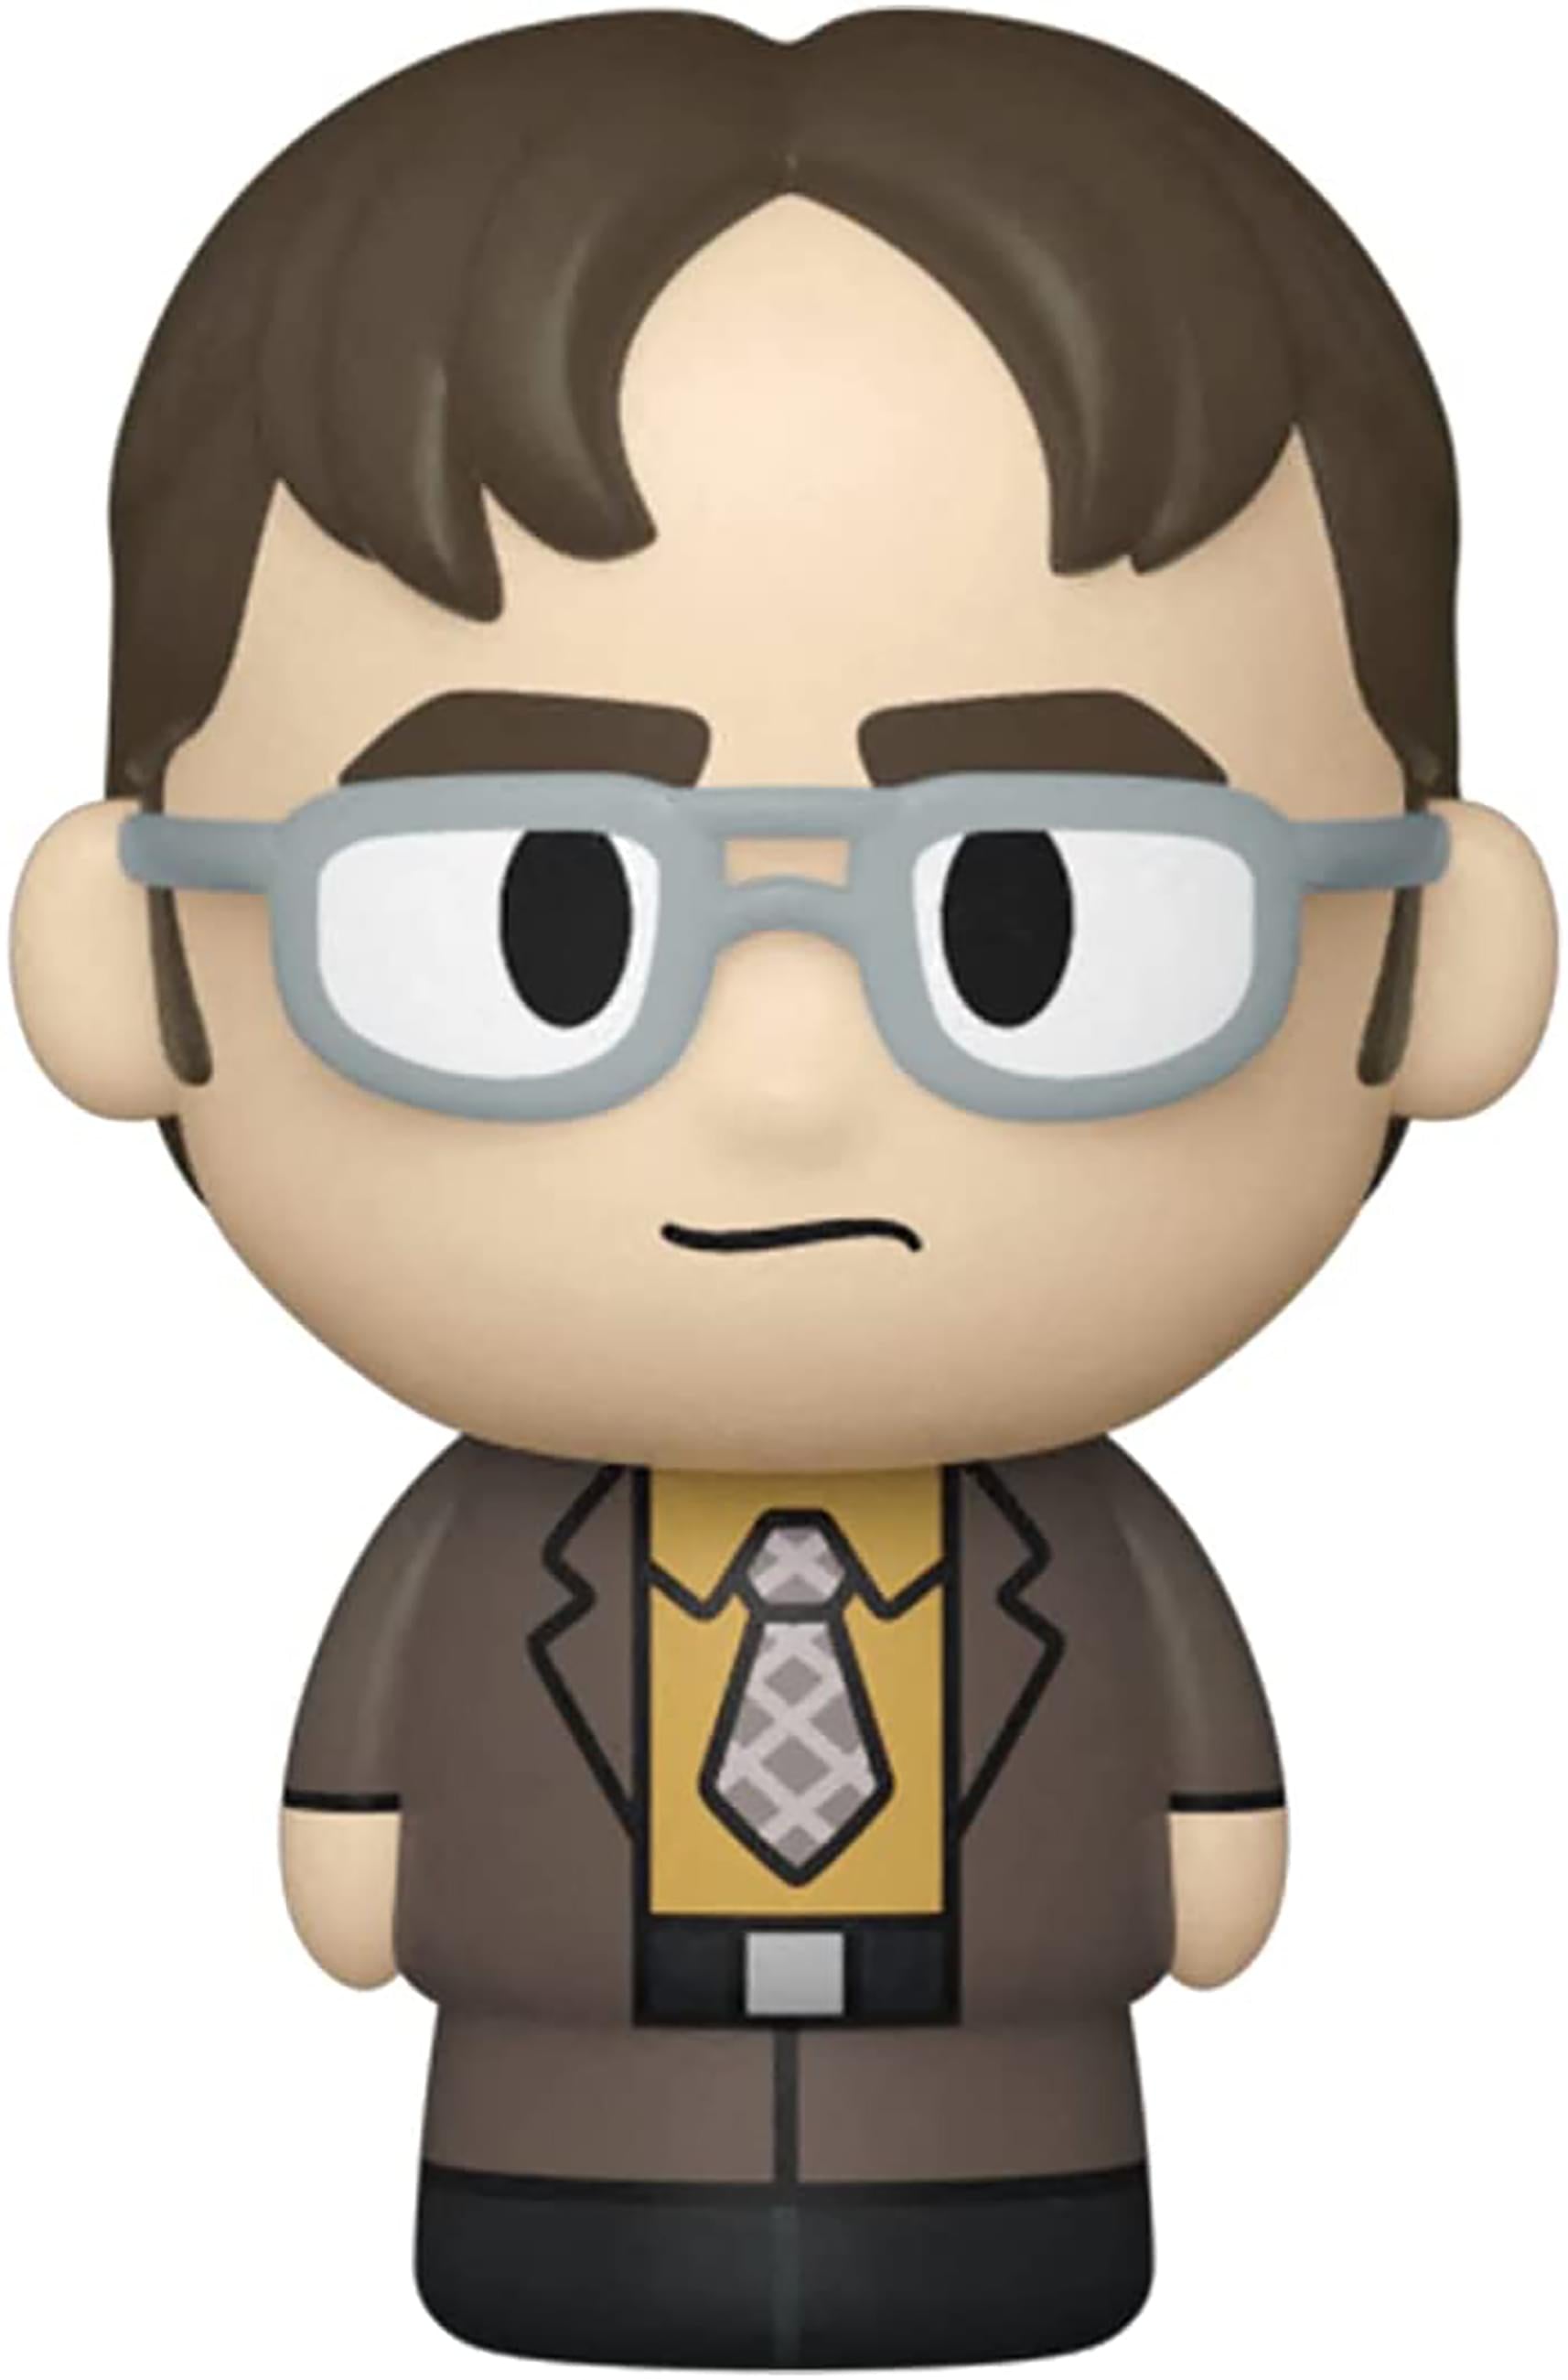 Photos - Action Figures / Transformers Funko The Office  Mimi Moments Figure Diorama | Dwight Schrute FNK-57389-C 